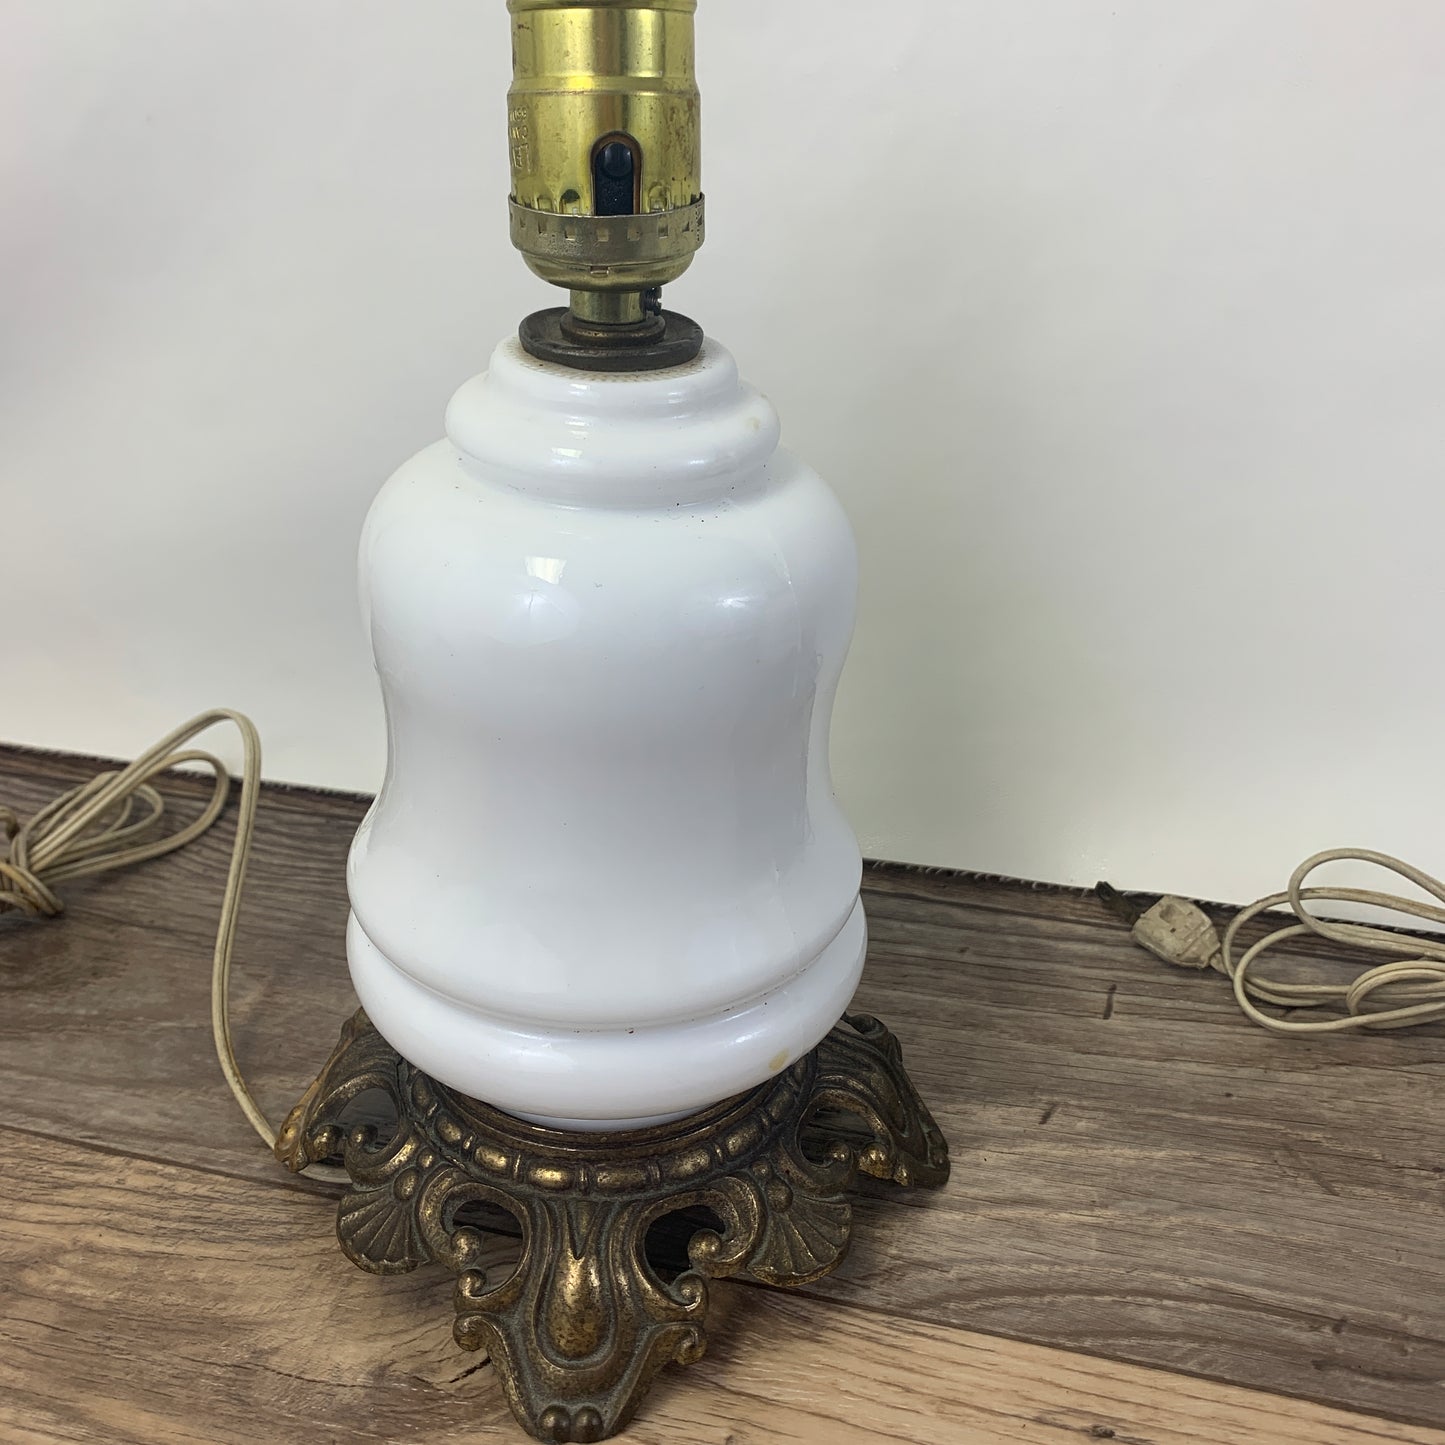 Pair of Milk Glass Table Lamps with Cast Metal Base